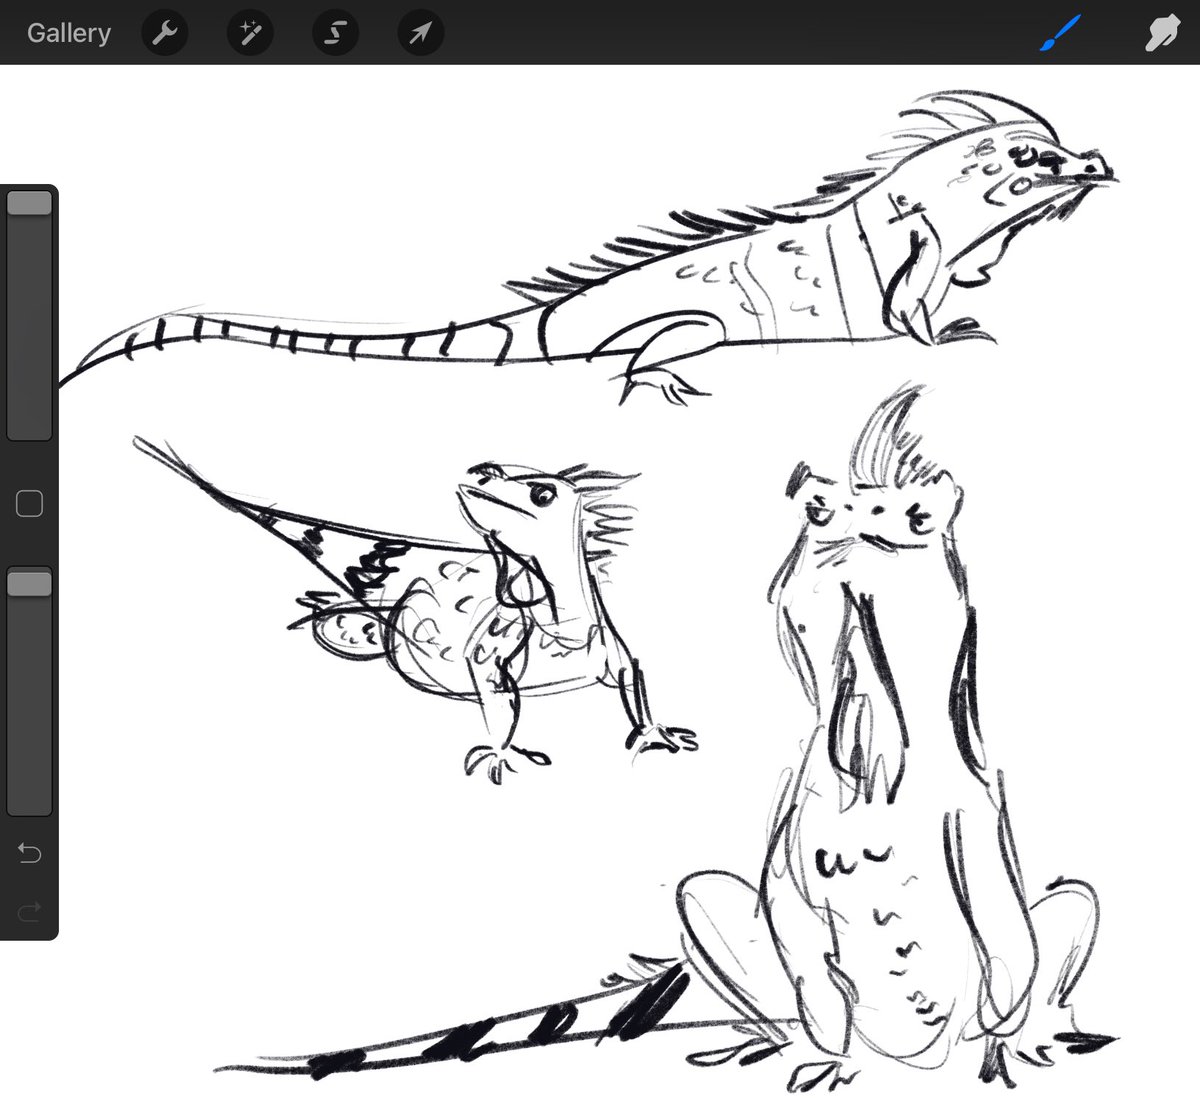 3 iguanas just ran up on me so naturally I tried to draw them 